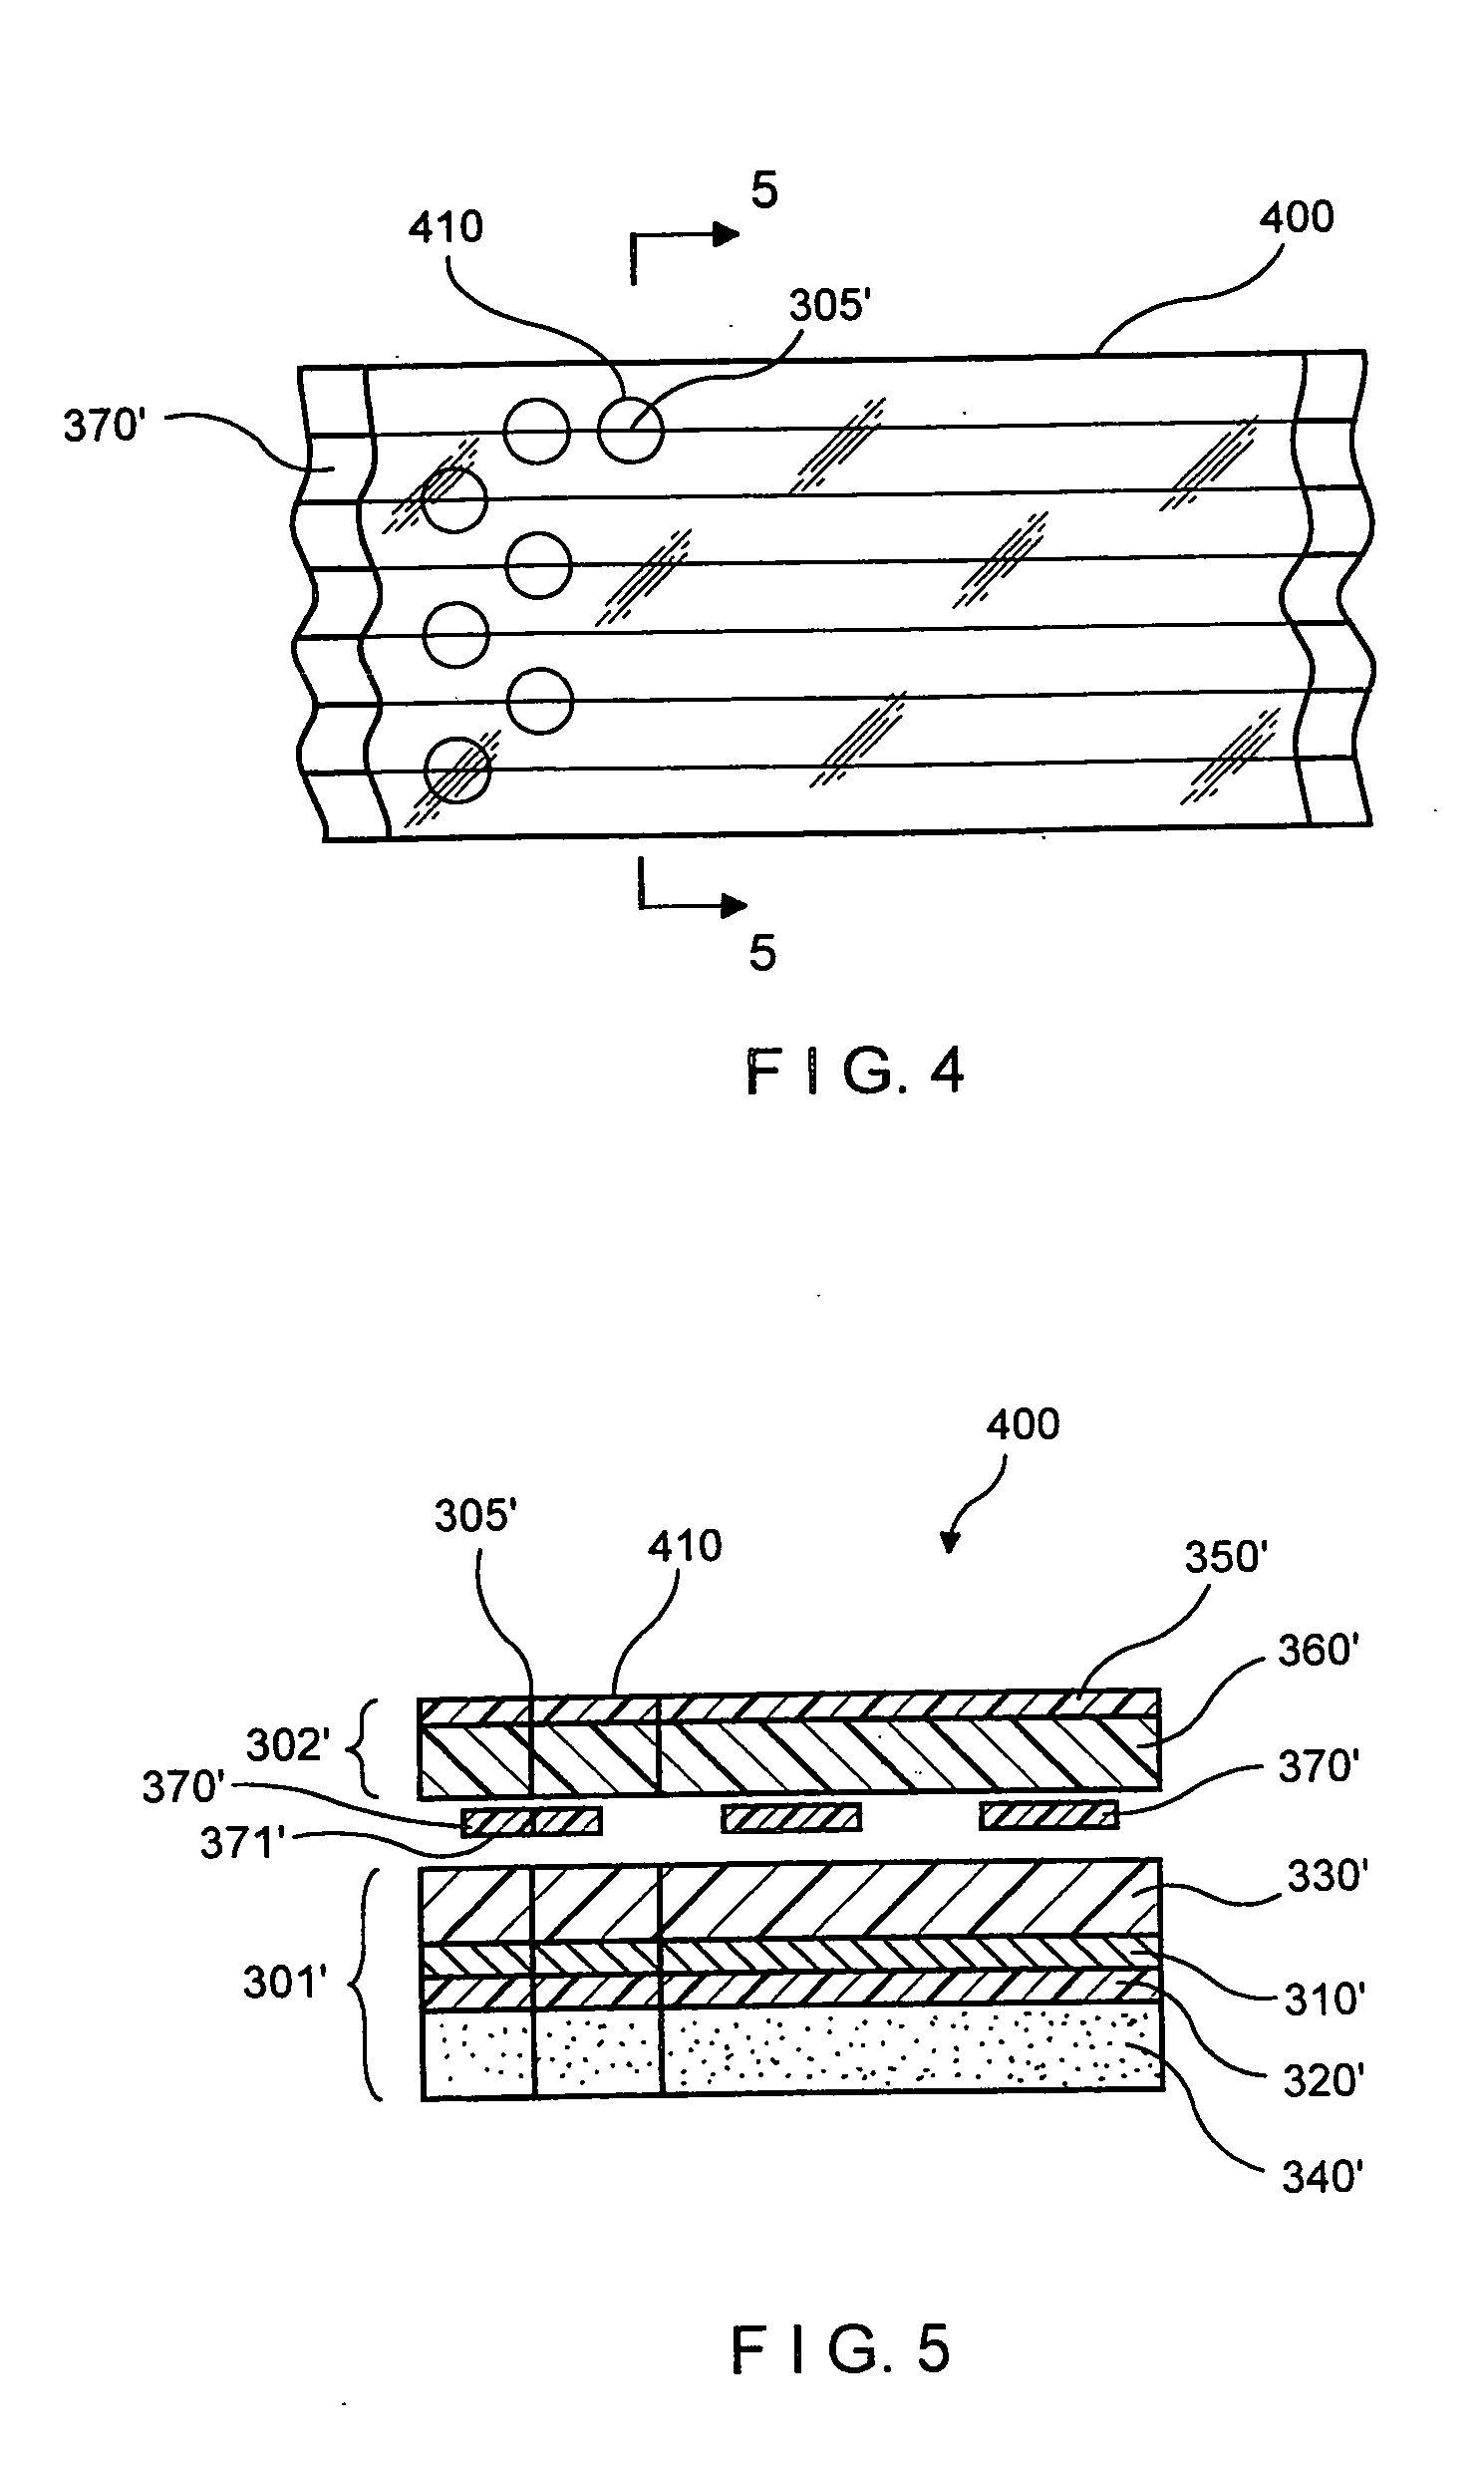 Polymer lined sealing member for a container